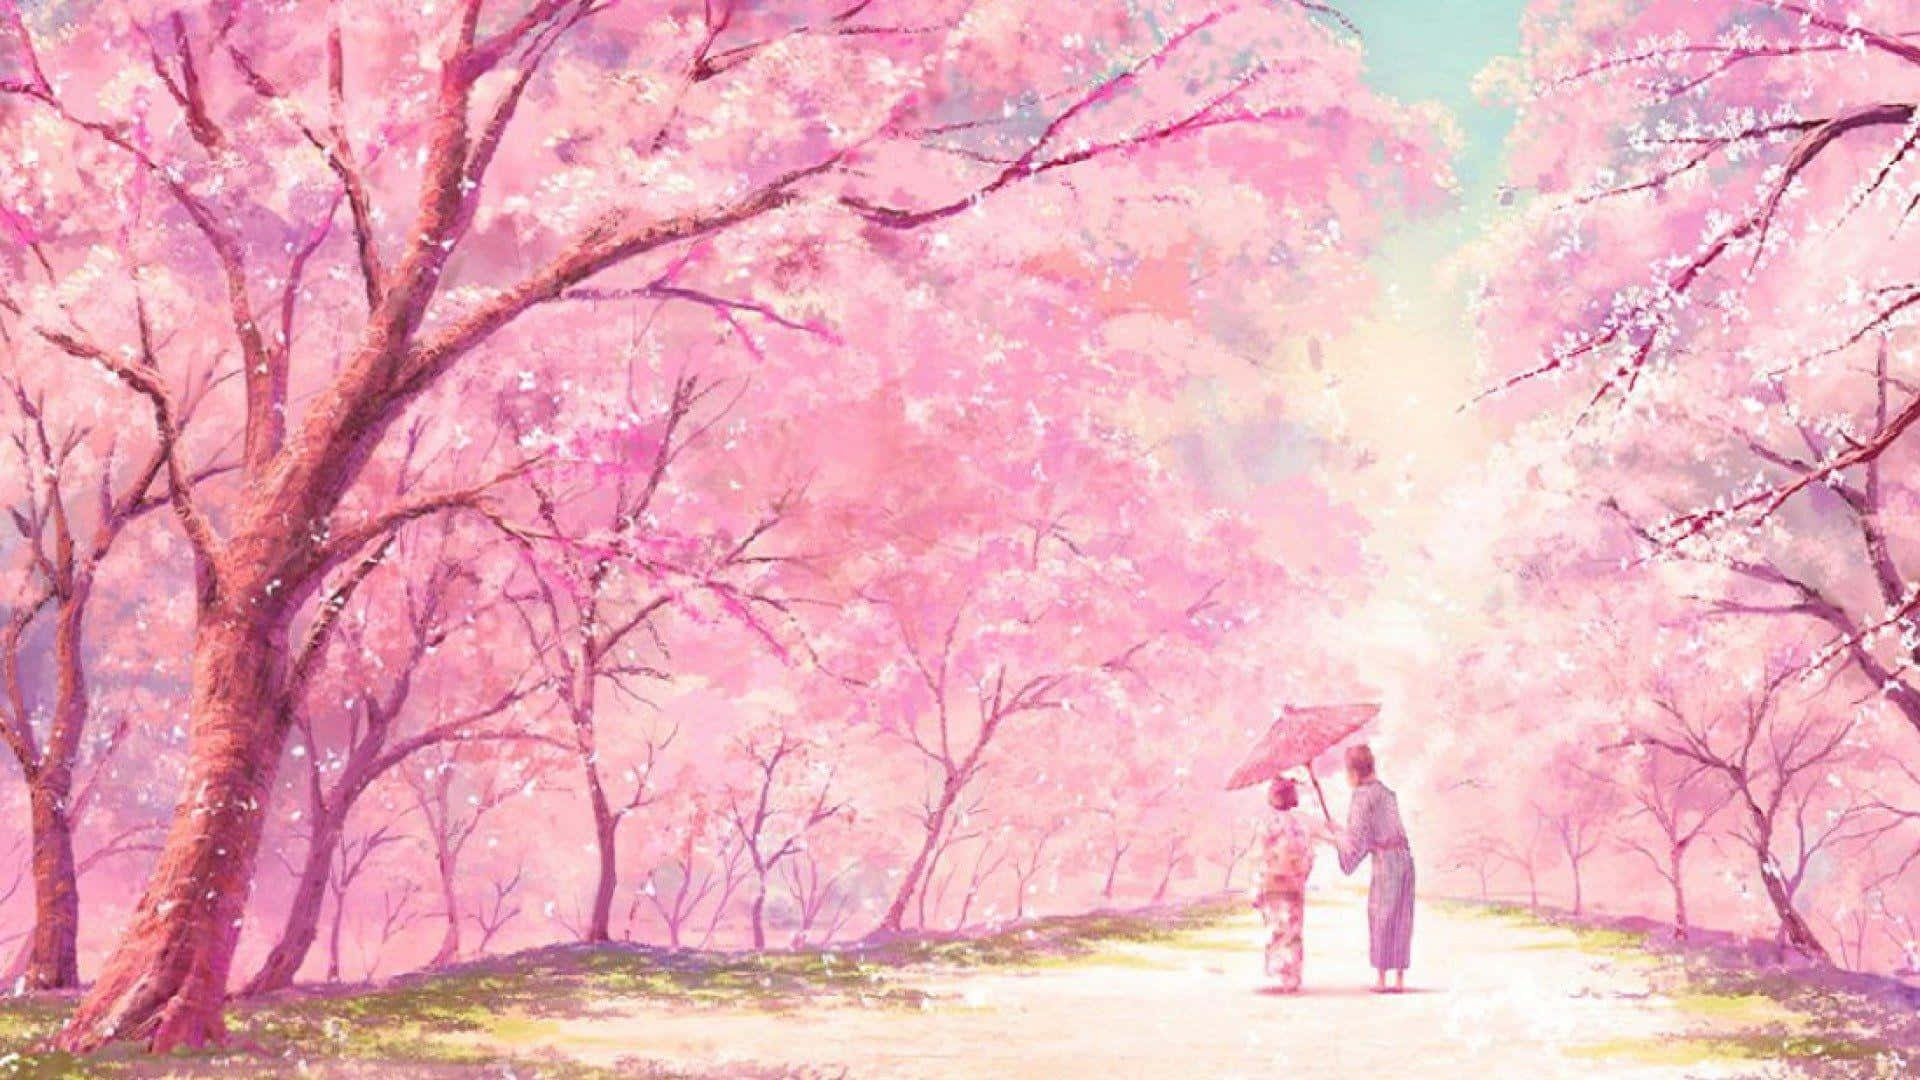 Enjoy this Cute Aesthetic Anime Desktop background to brighten up your day! Wallpaper